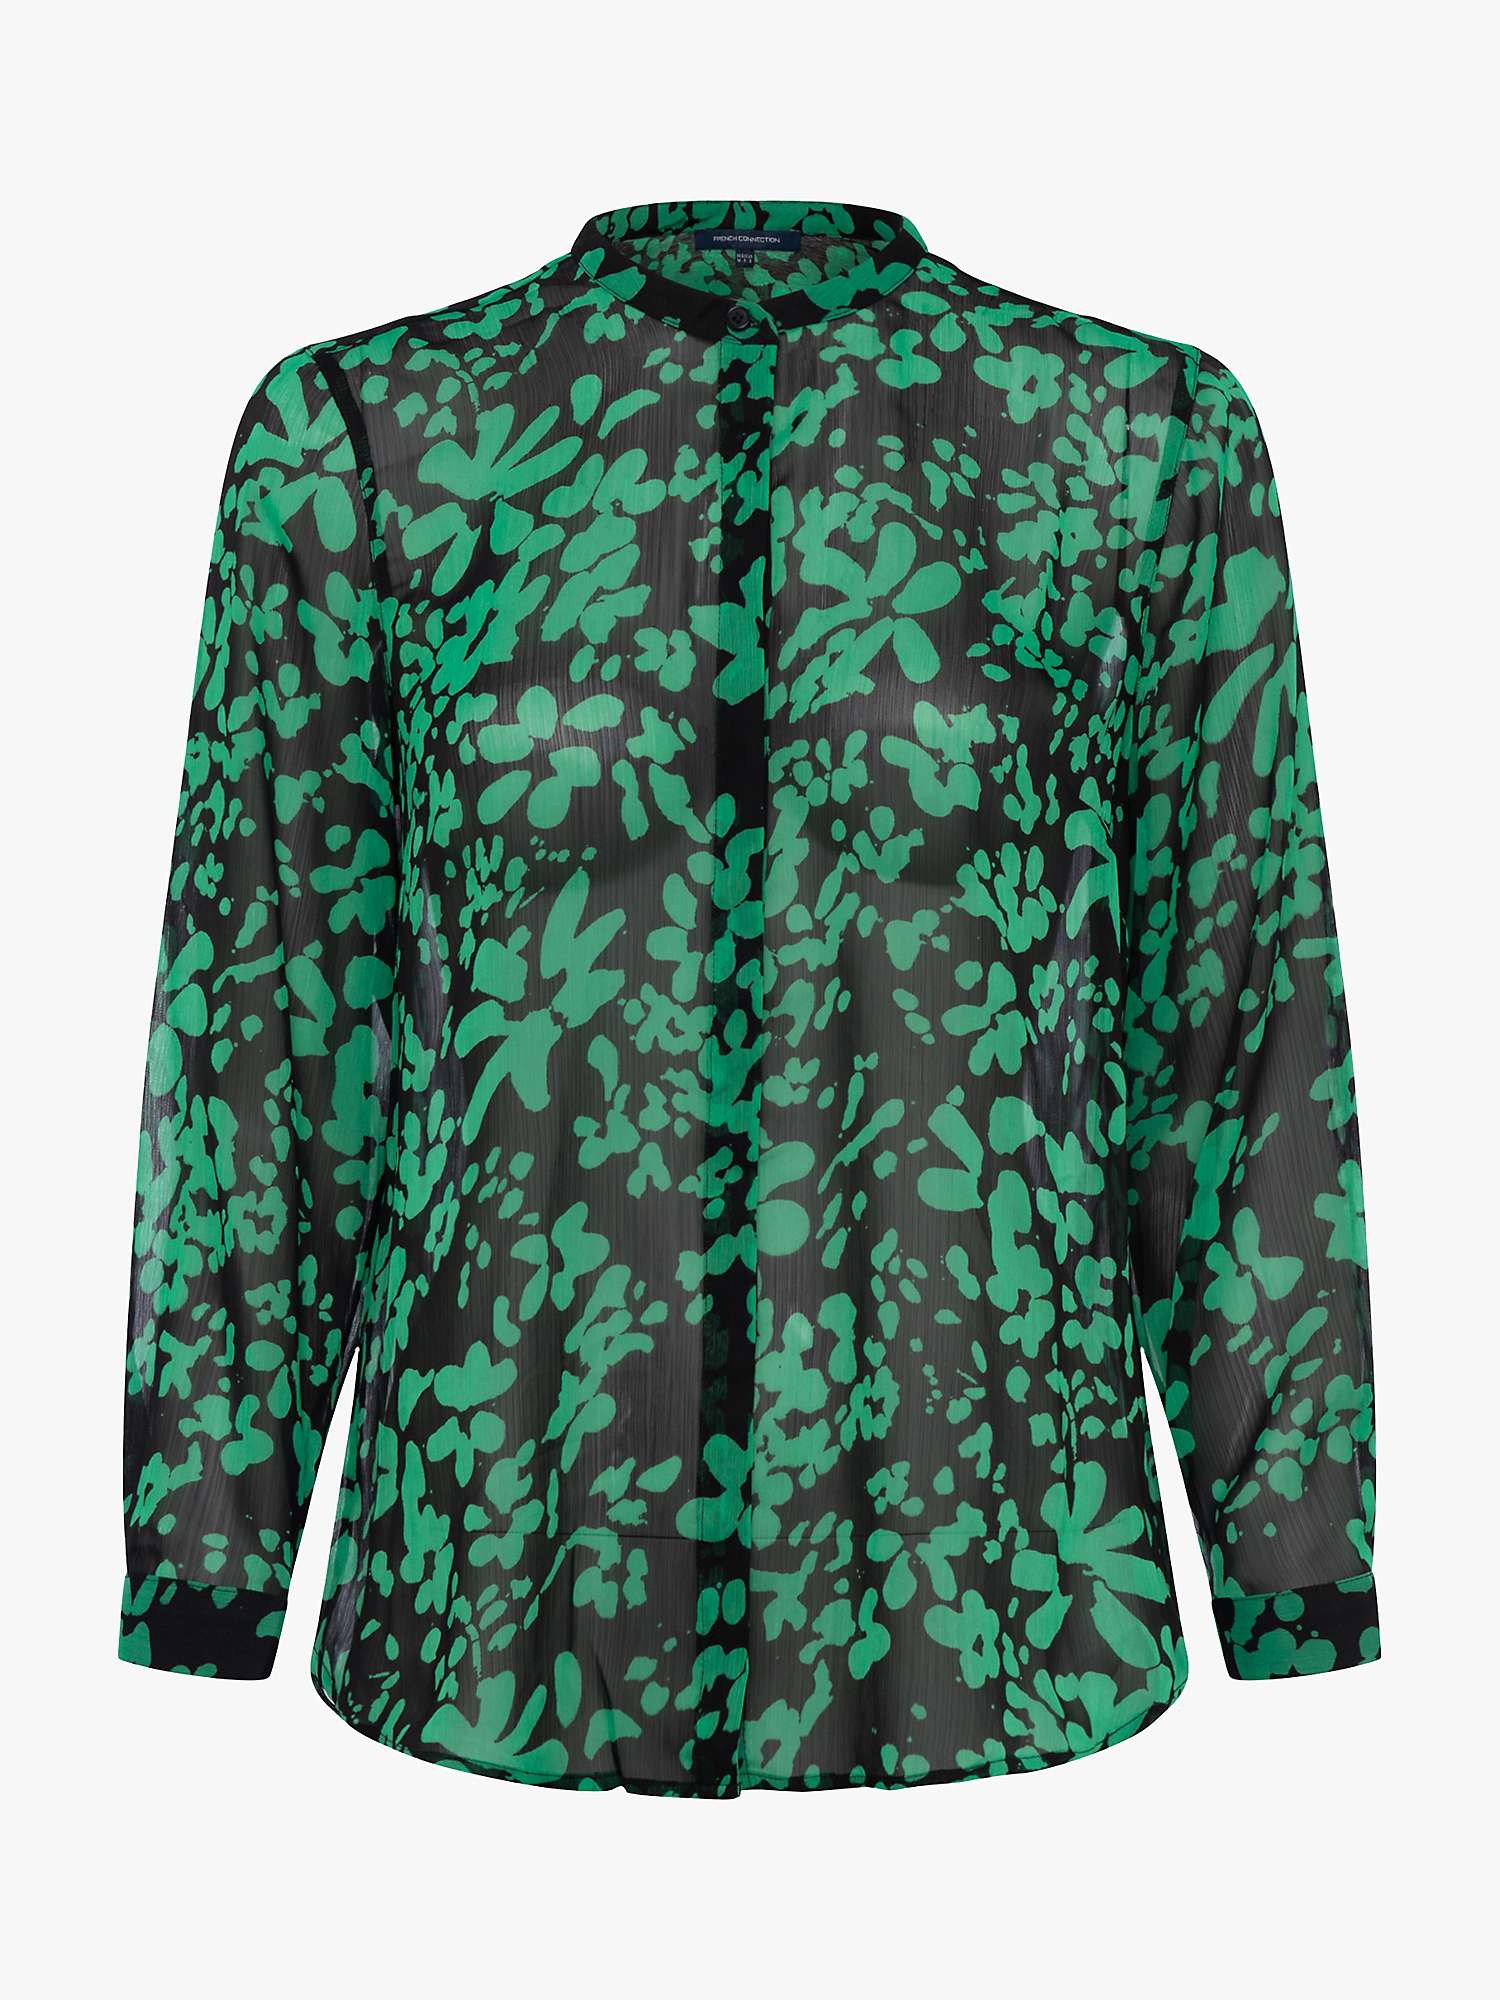 Buy French Connection Floral Print Blouse, Palm Green/Black Online at johnlewis.com